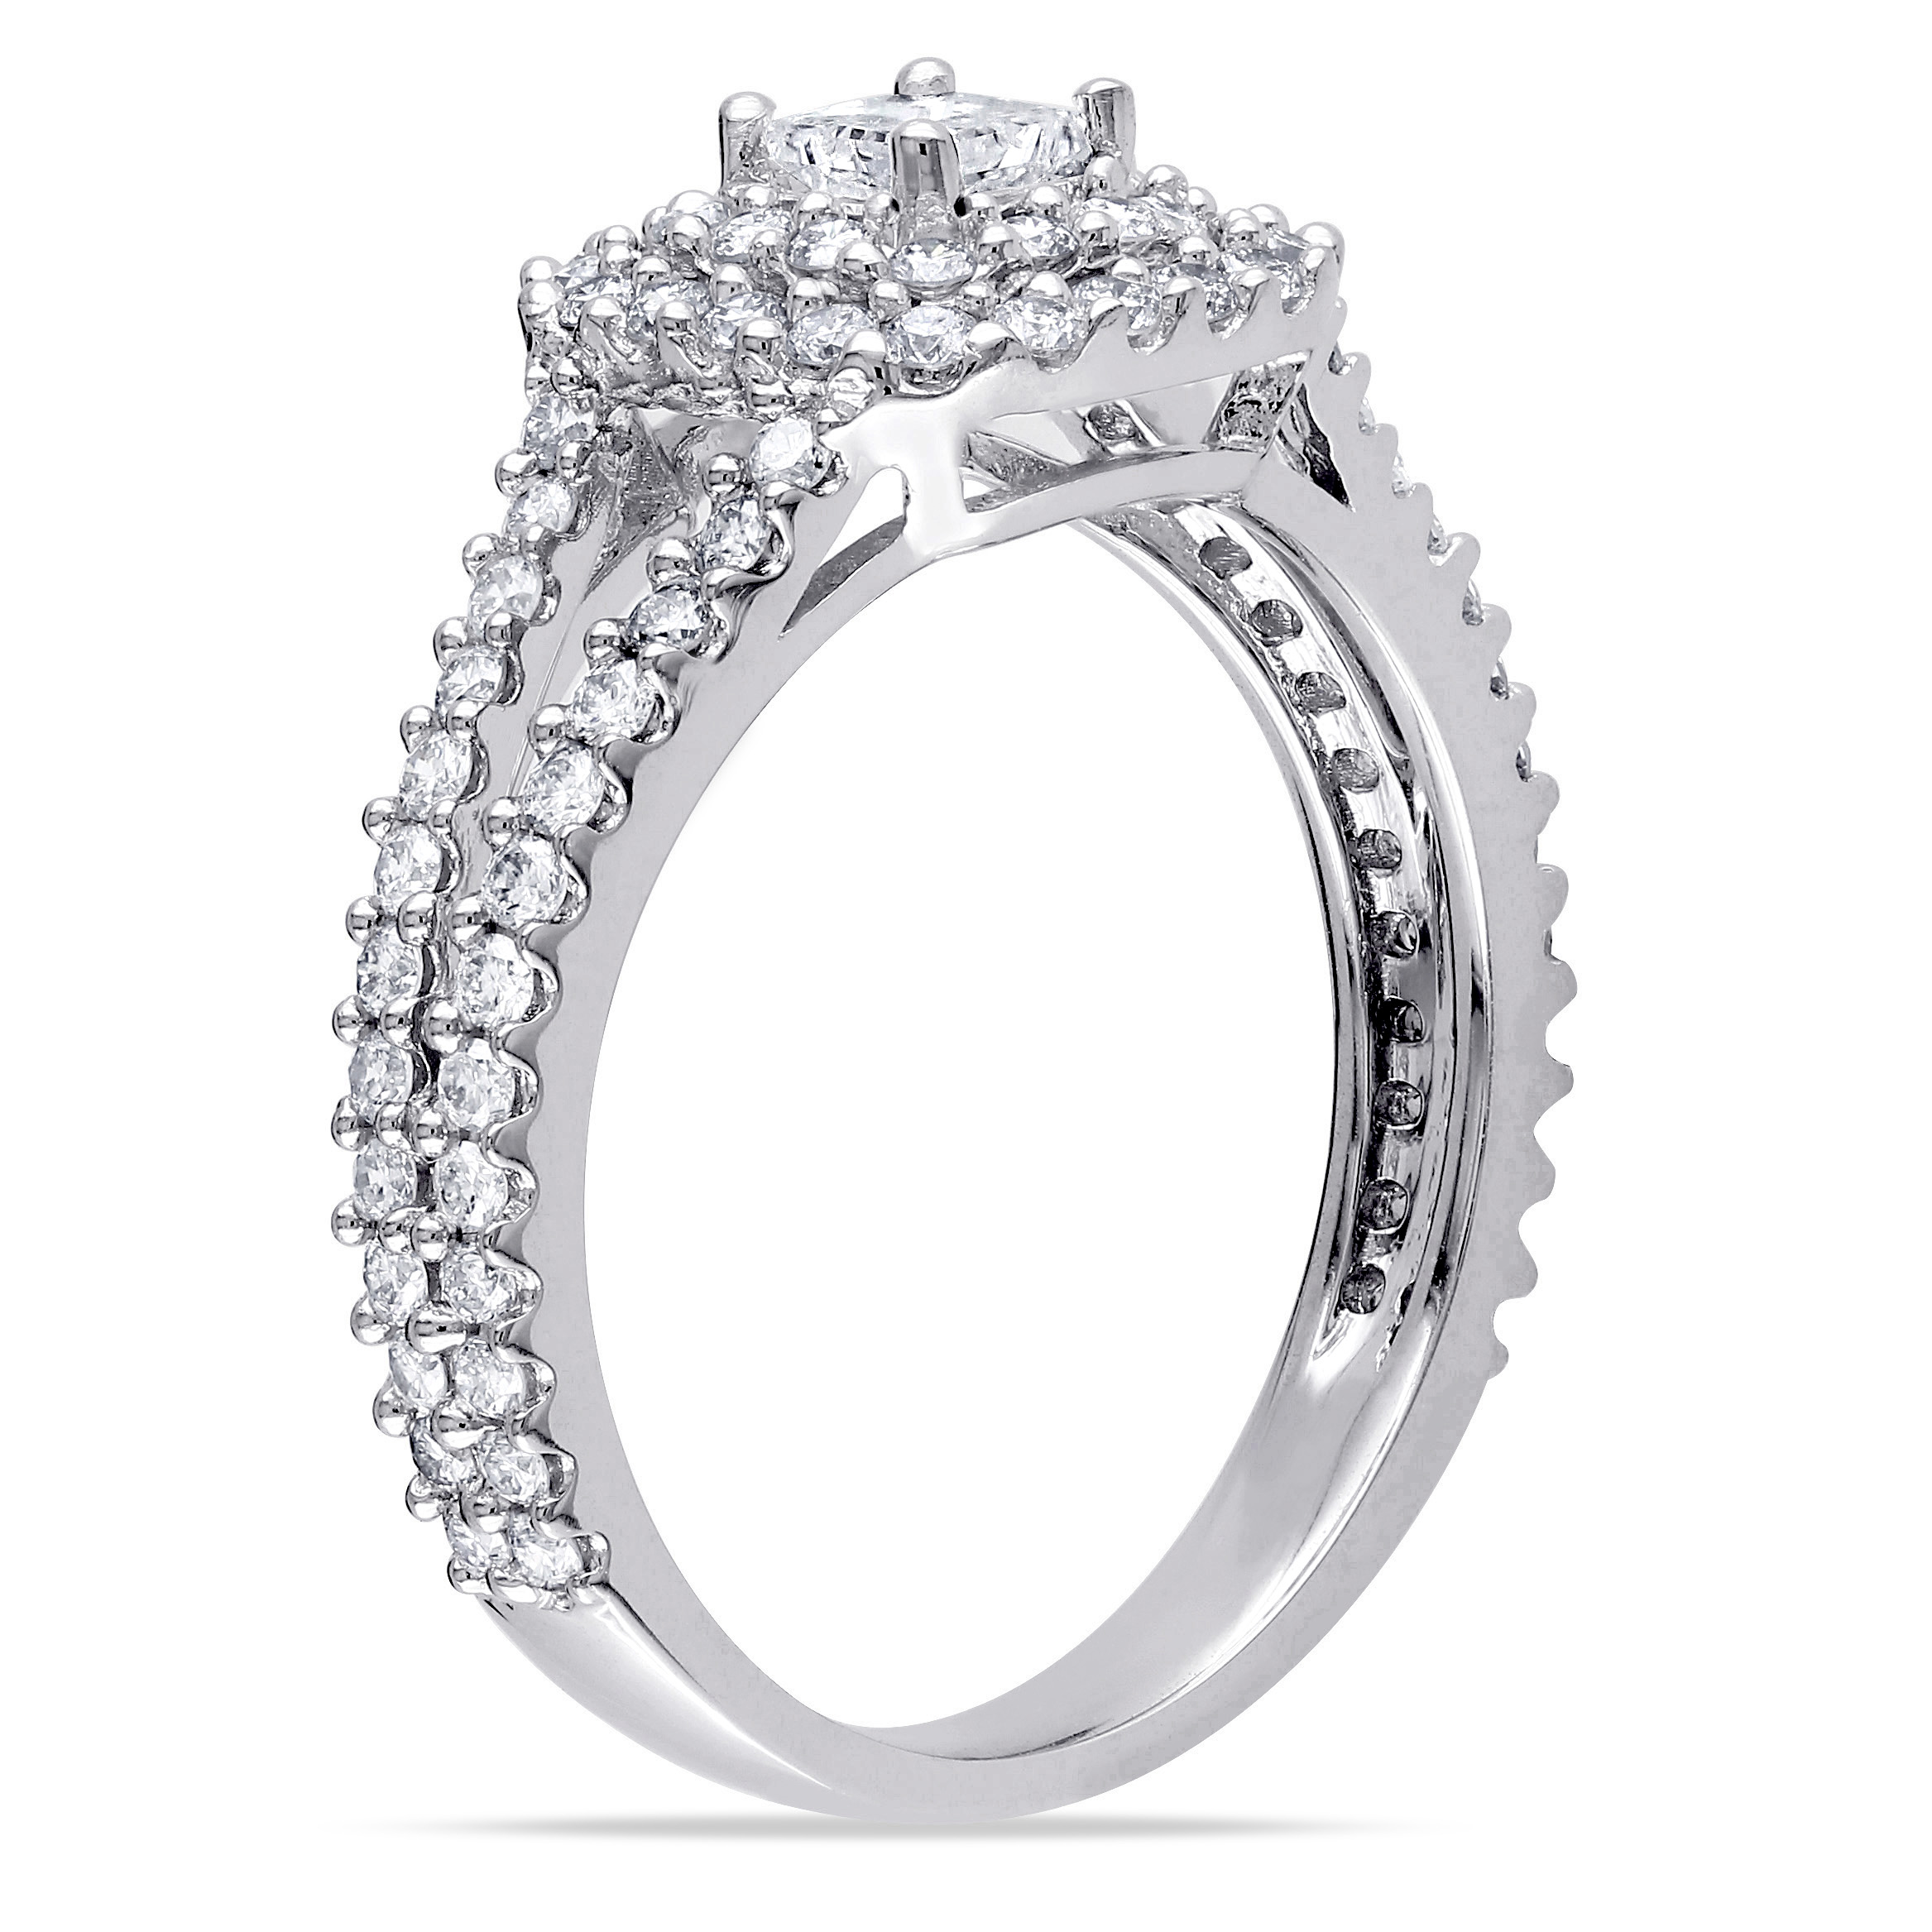 1 CT TW Princess Cut Halo Diamond Engagement Ring in 14k White Gold